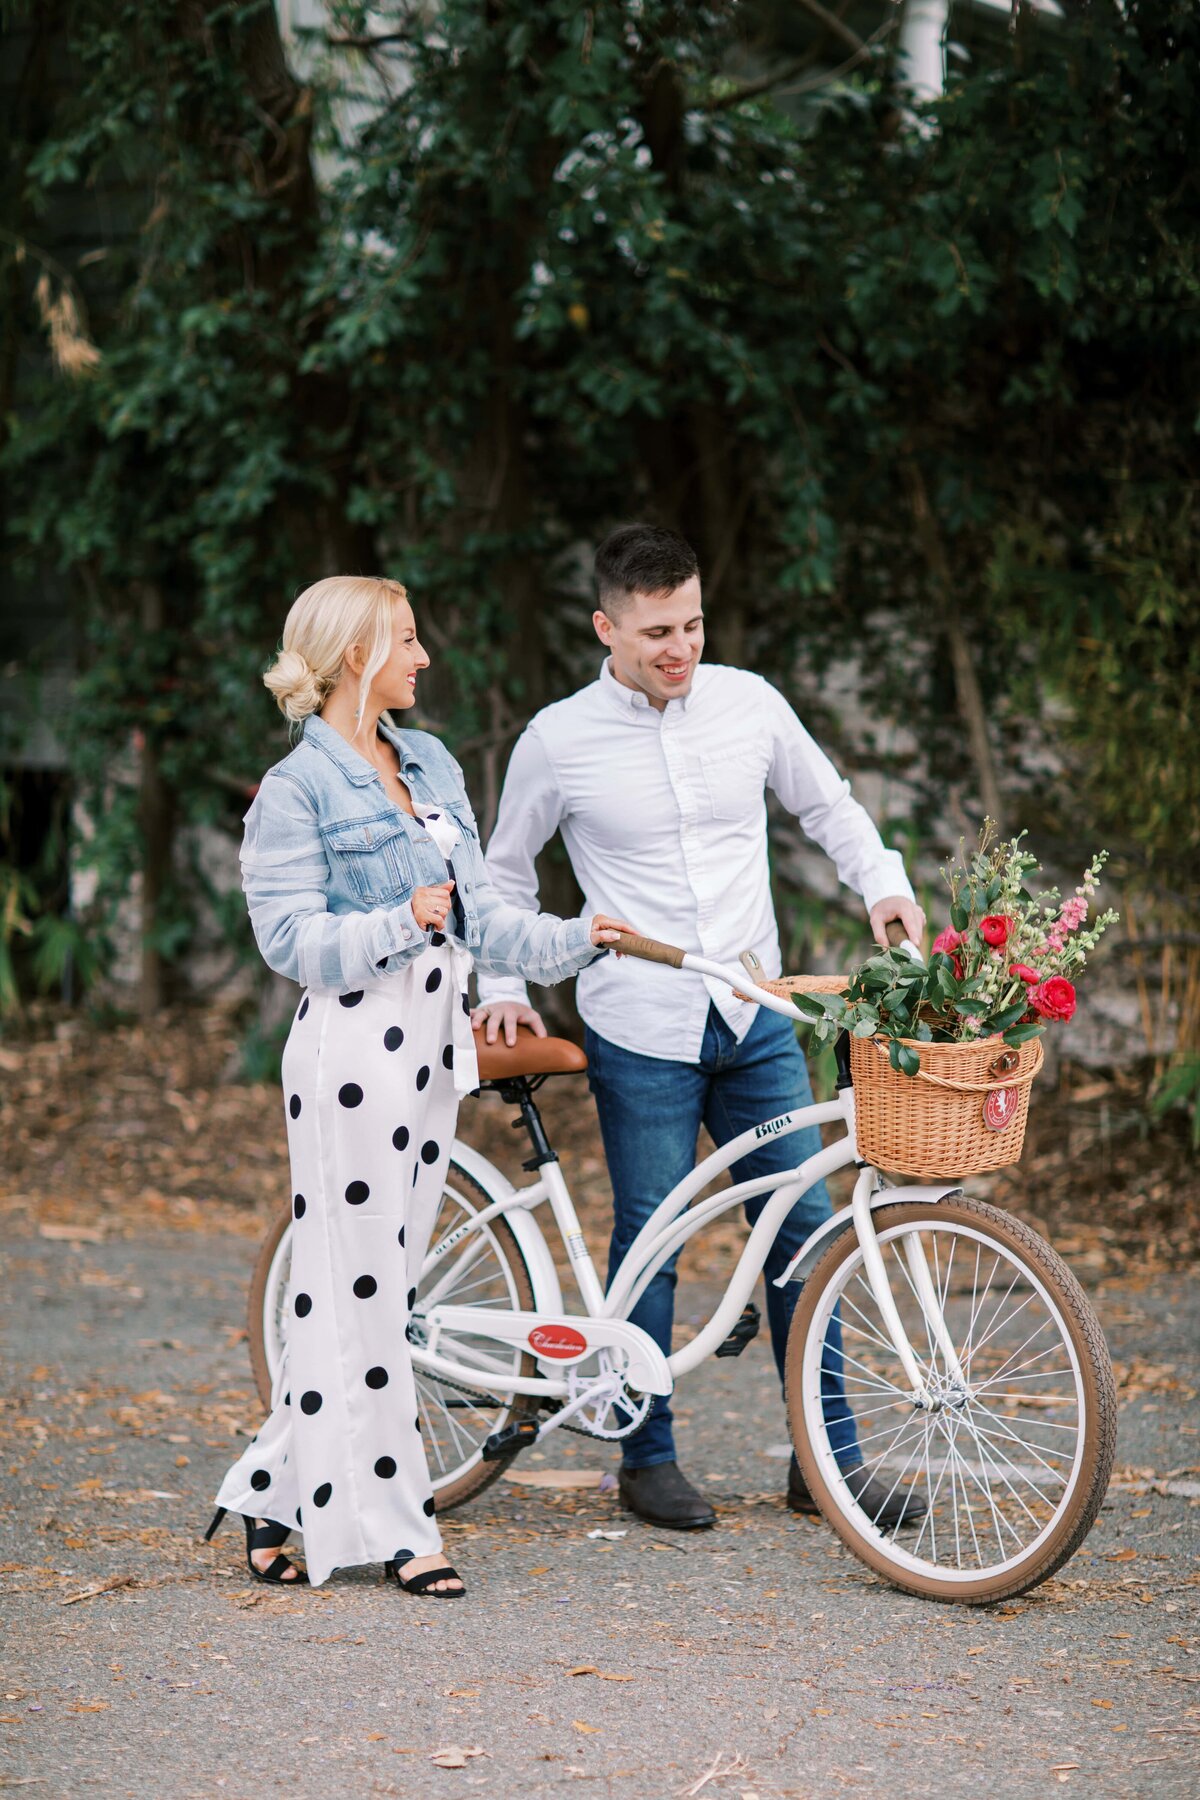 Young blonde girl in polka dot outfit walks beside a handsome guy with a white bike and flowers in the basket for their engagement session with Danielle Defayette Photography in Charleston